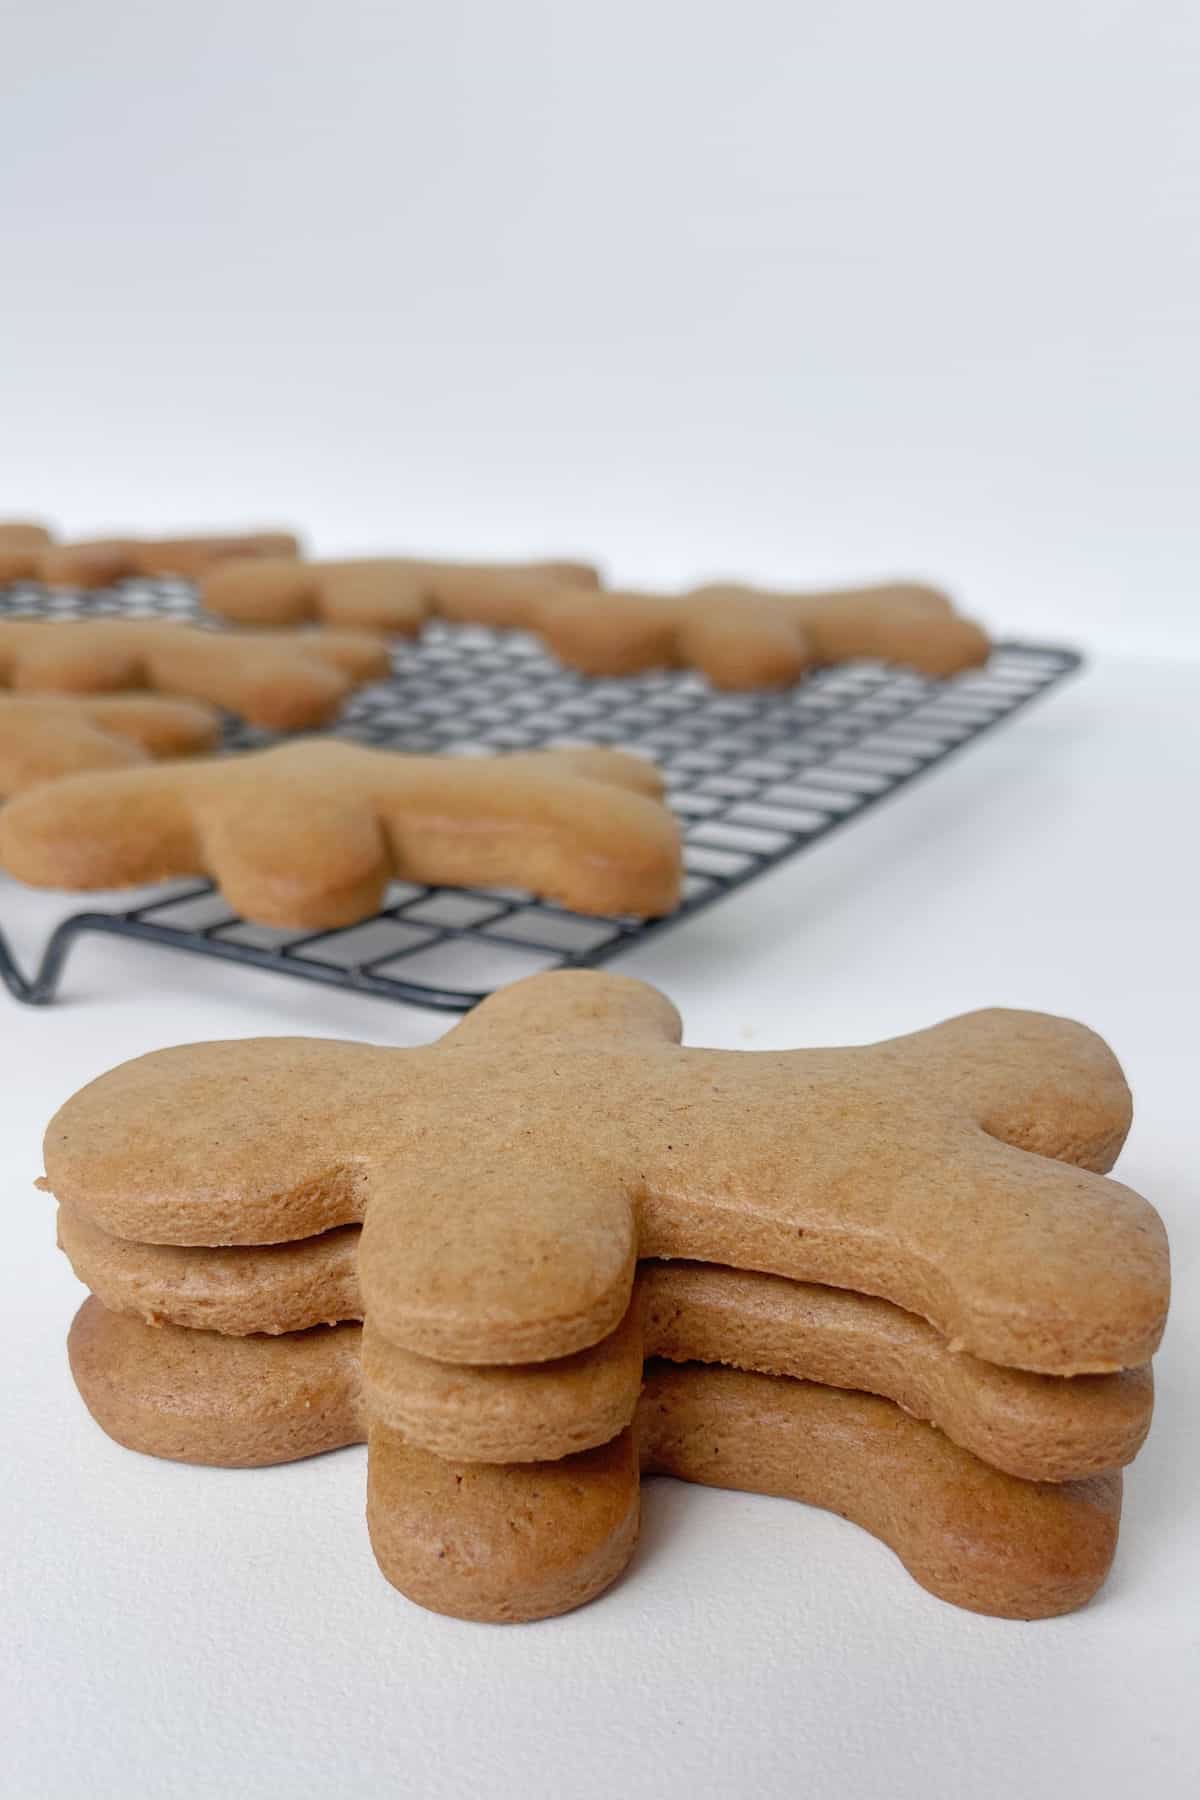 Three gingerbread people stacked on top of each other. In the background is a wire rack with more biscuits.